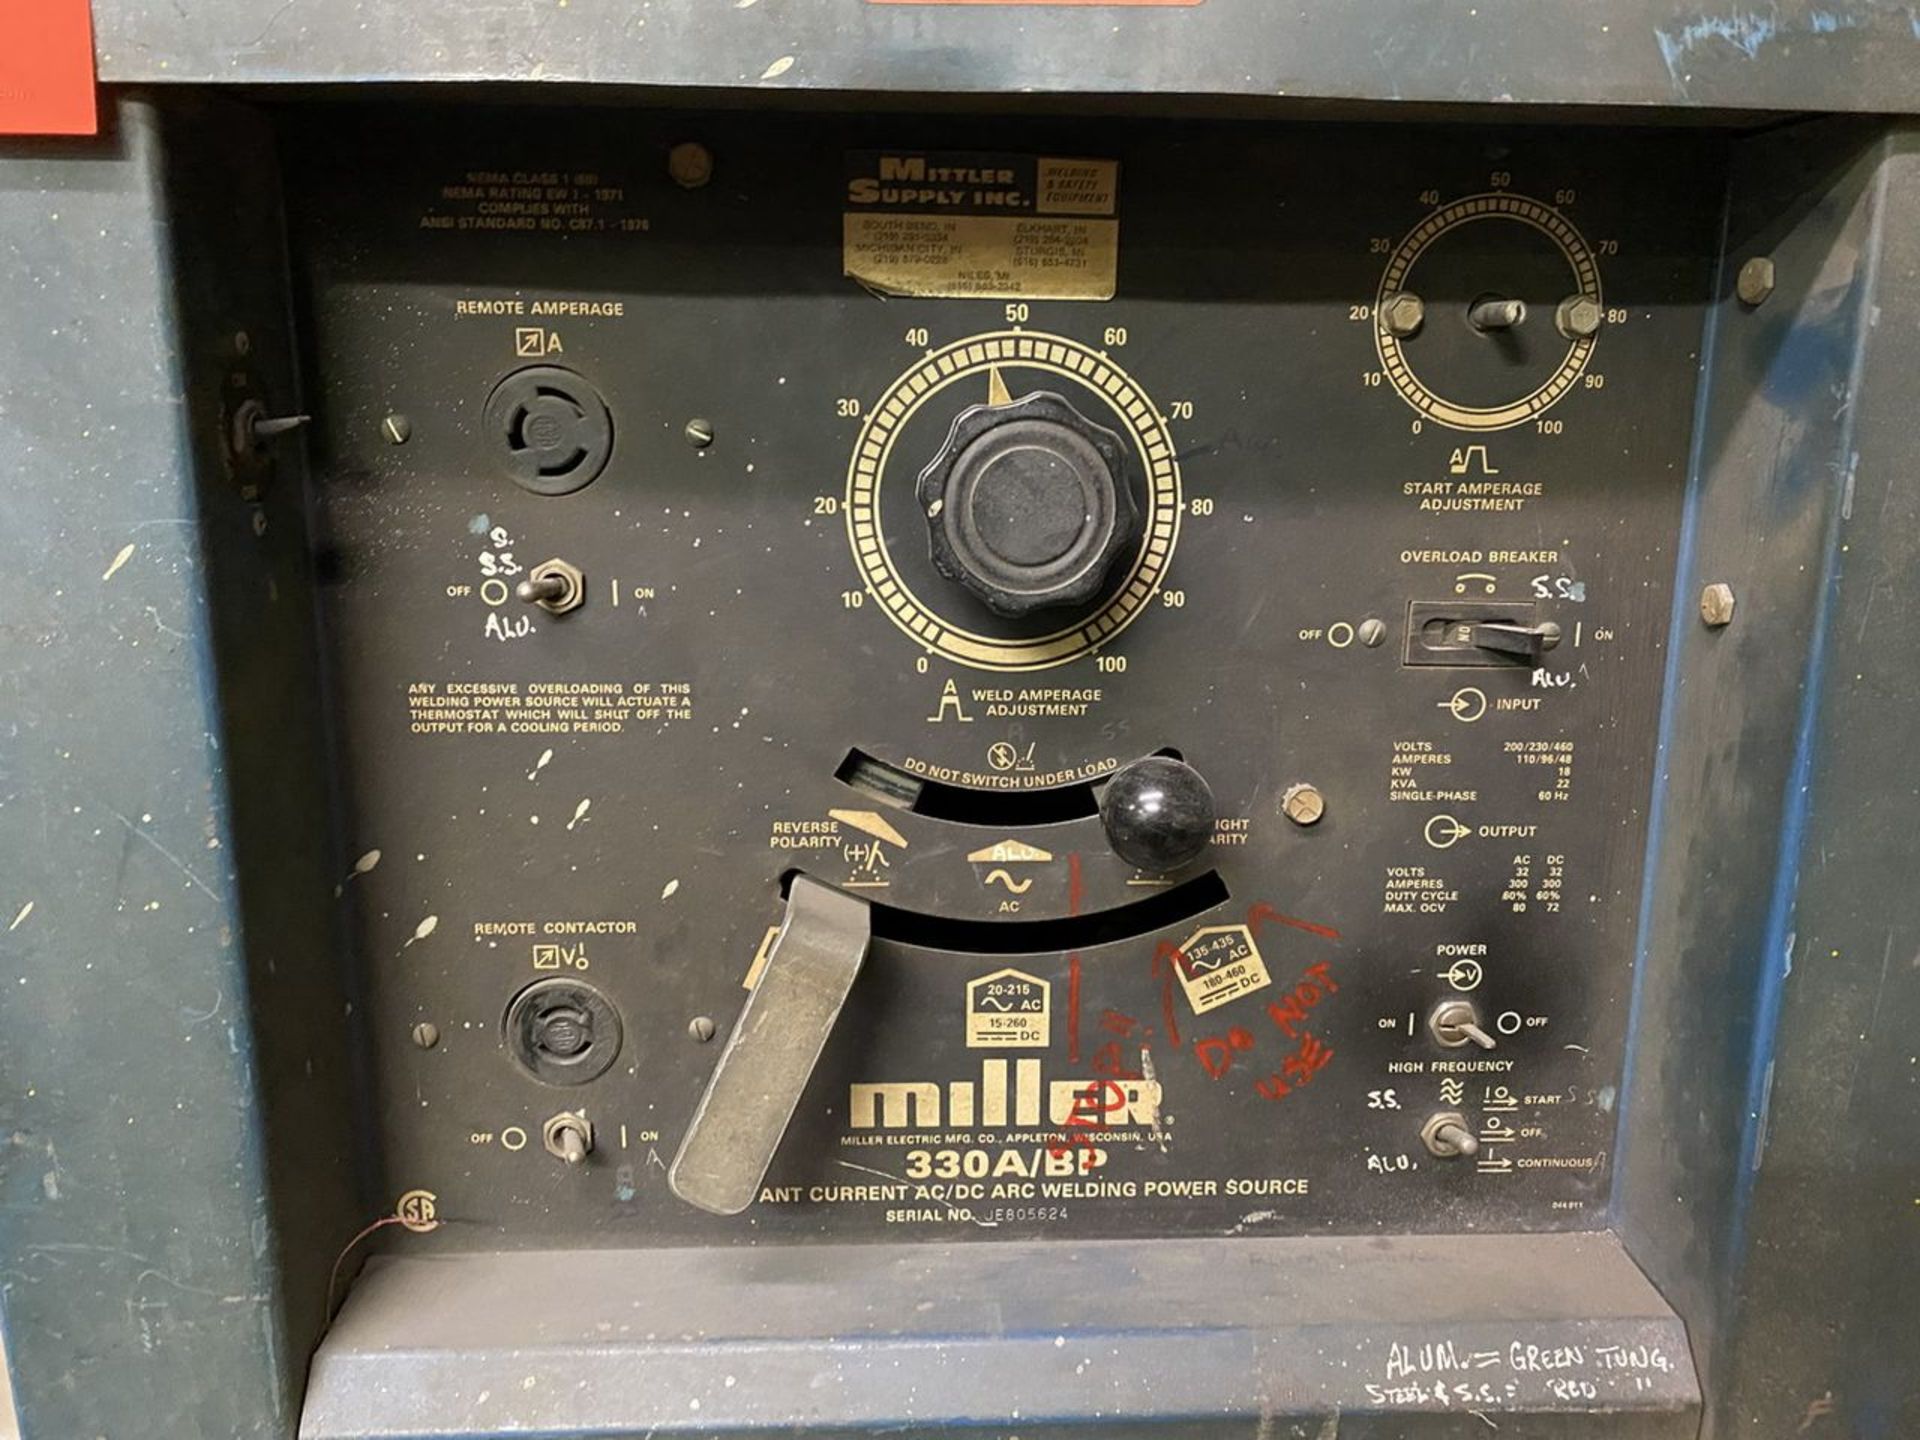 Miller Model 330 A/BP Constant Current AC/DC Arc Welding Power Source, S/N: JE805624; Rated Nema - Image 3 of 4